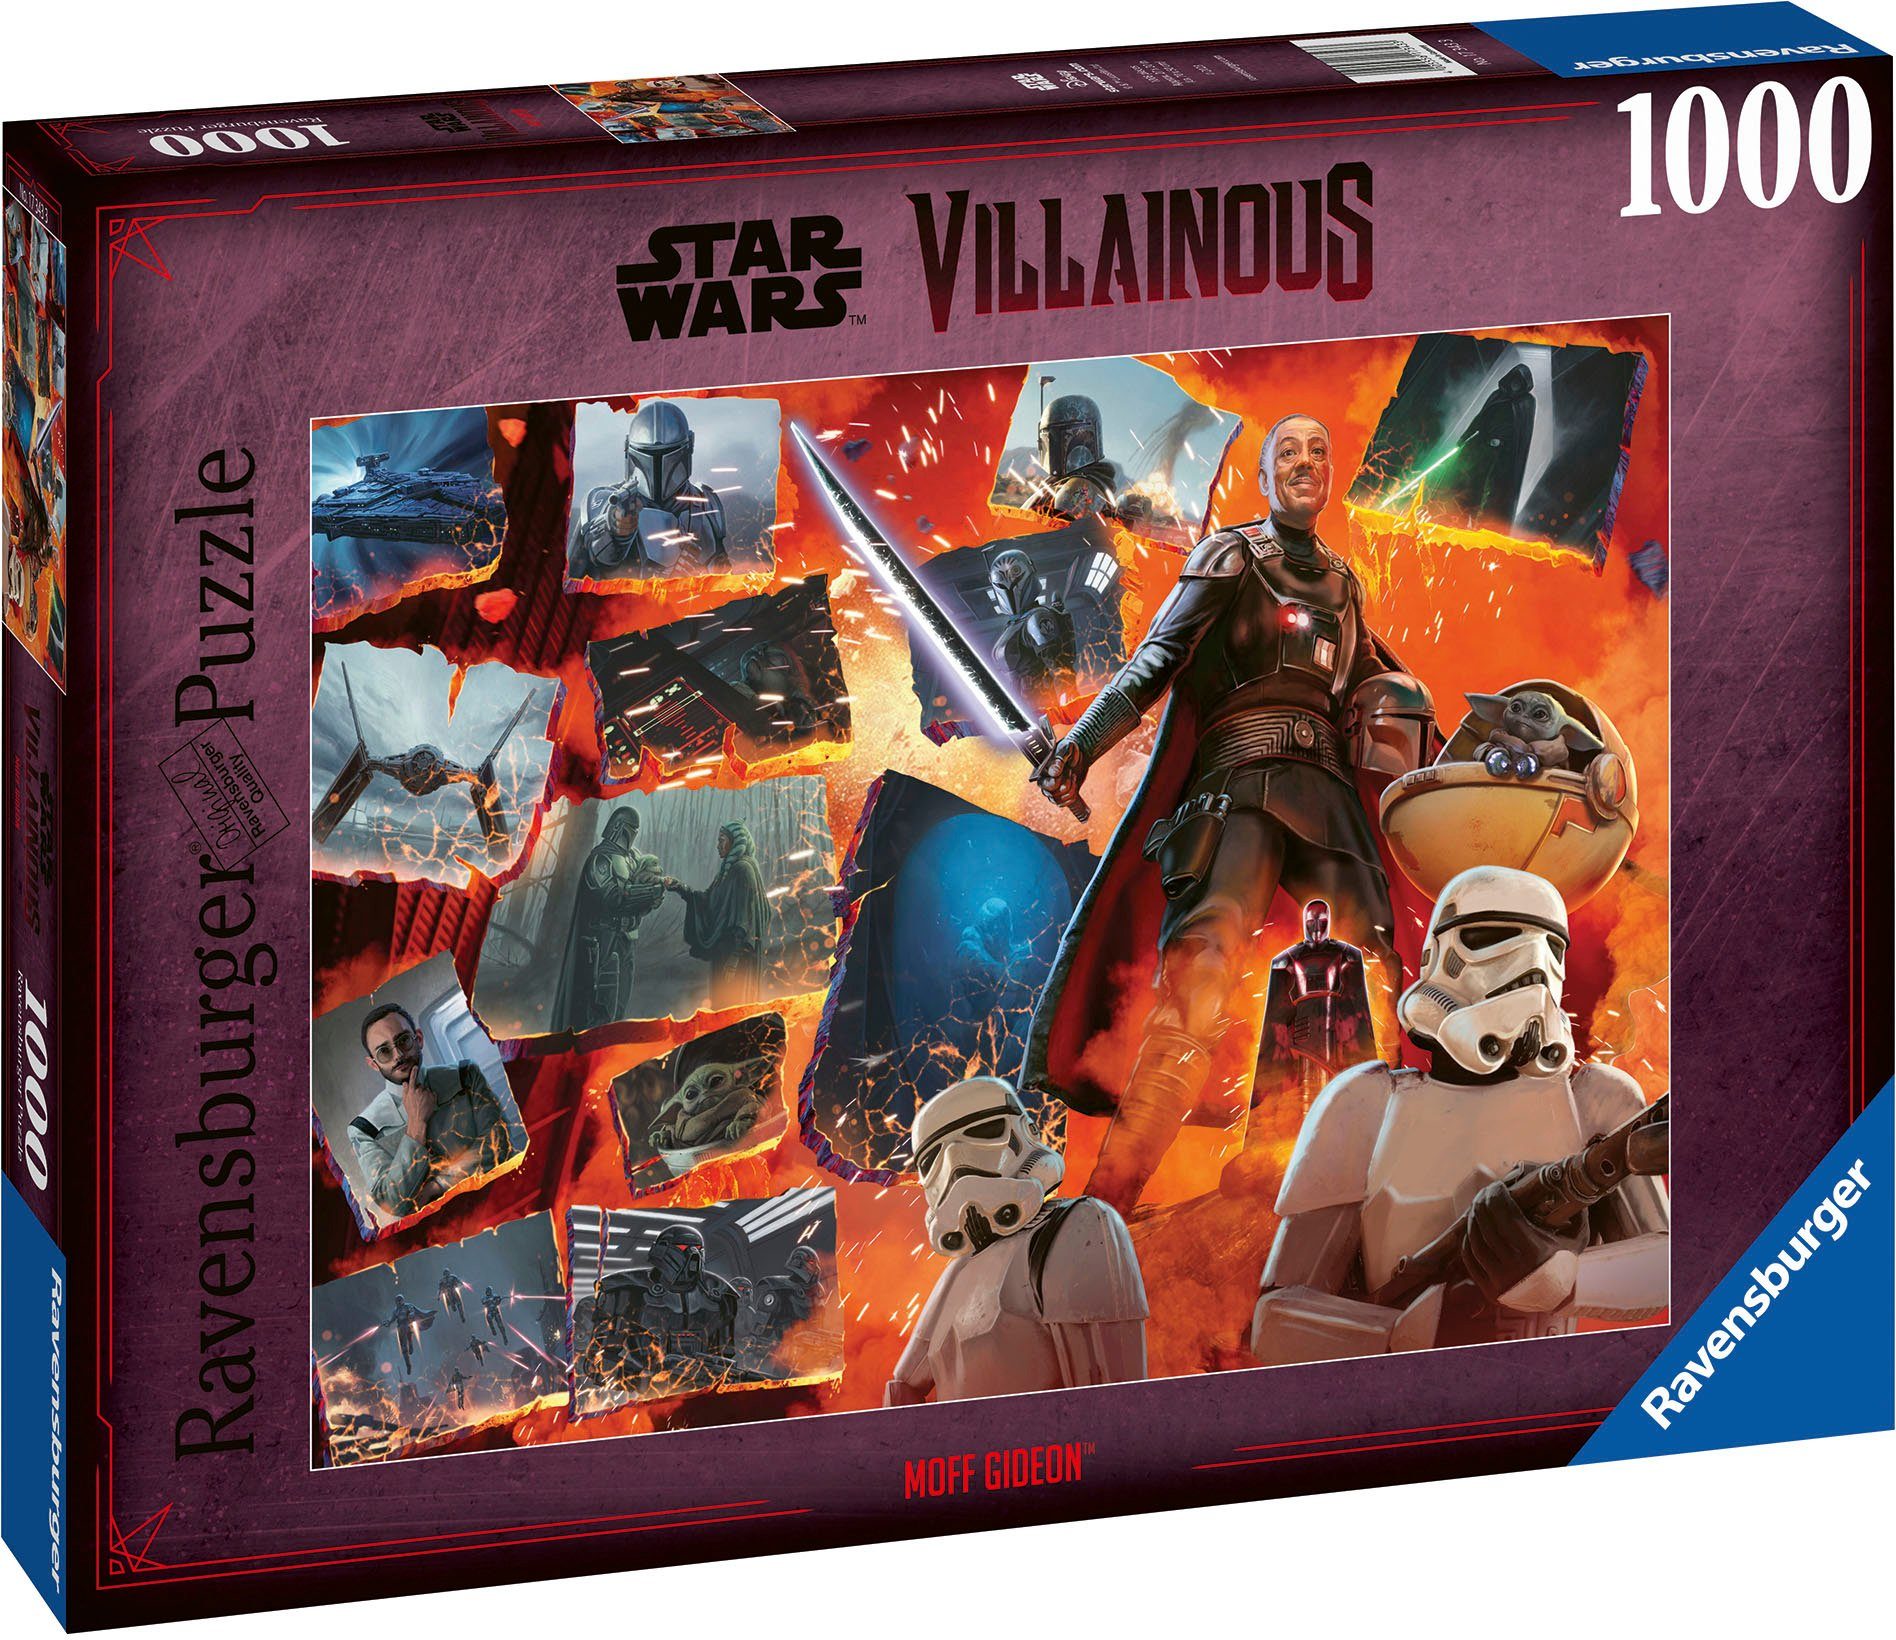 Ravensburger Puzzle Star Moff Wars Villainous, Gideon, Made Puzzleteile, in Germany 1000